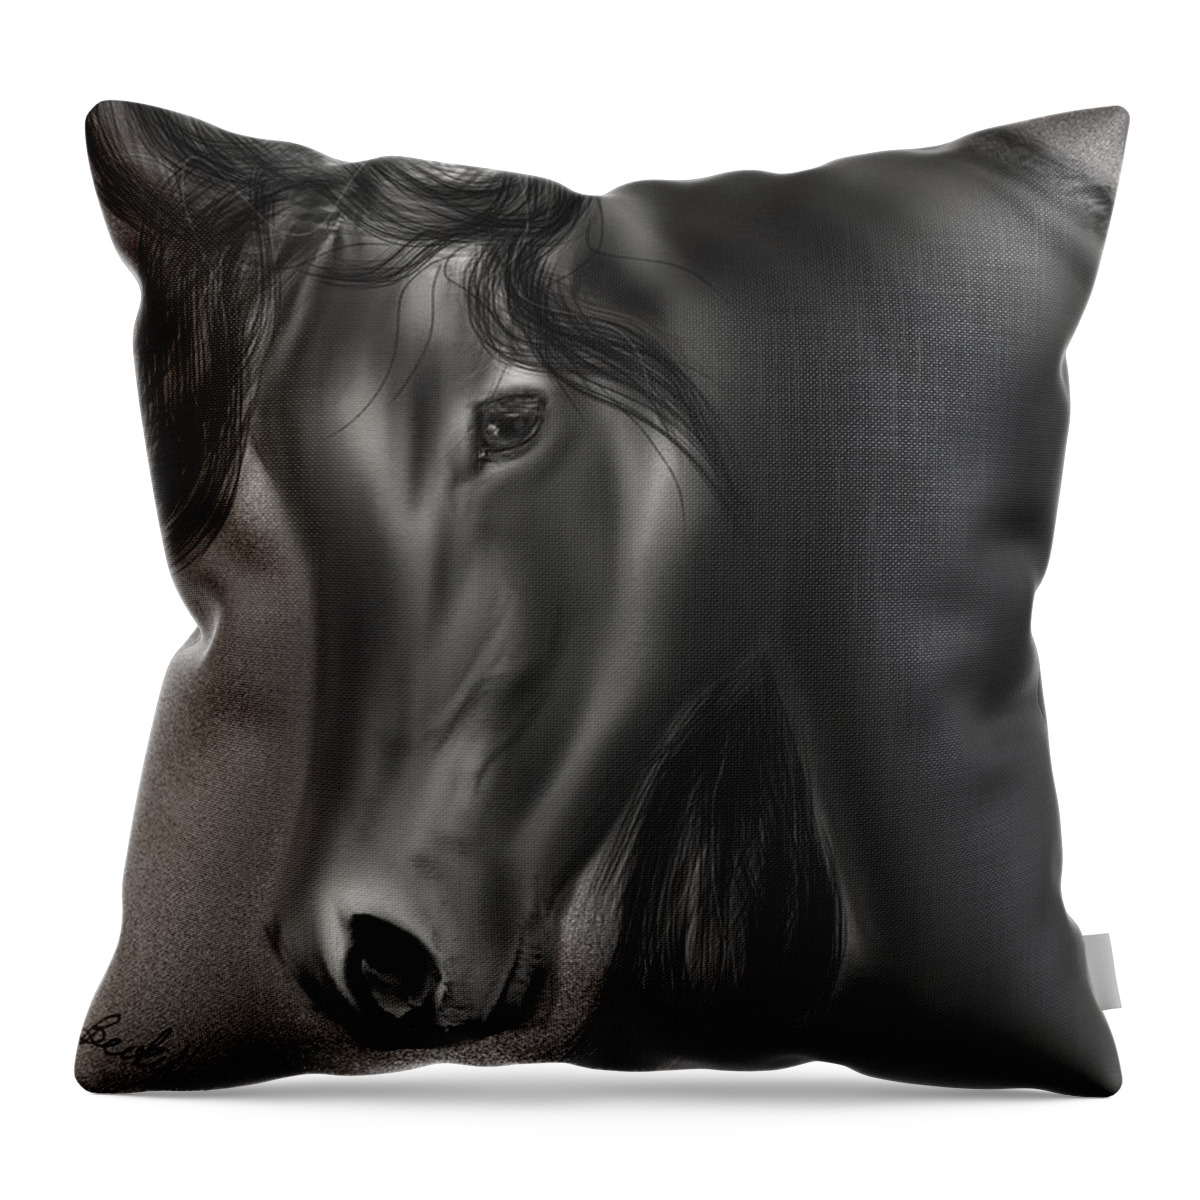 Horse Throw Pillow featuring the drawing Arabian Horse by Becky Herrera